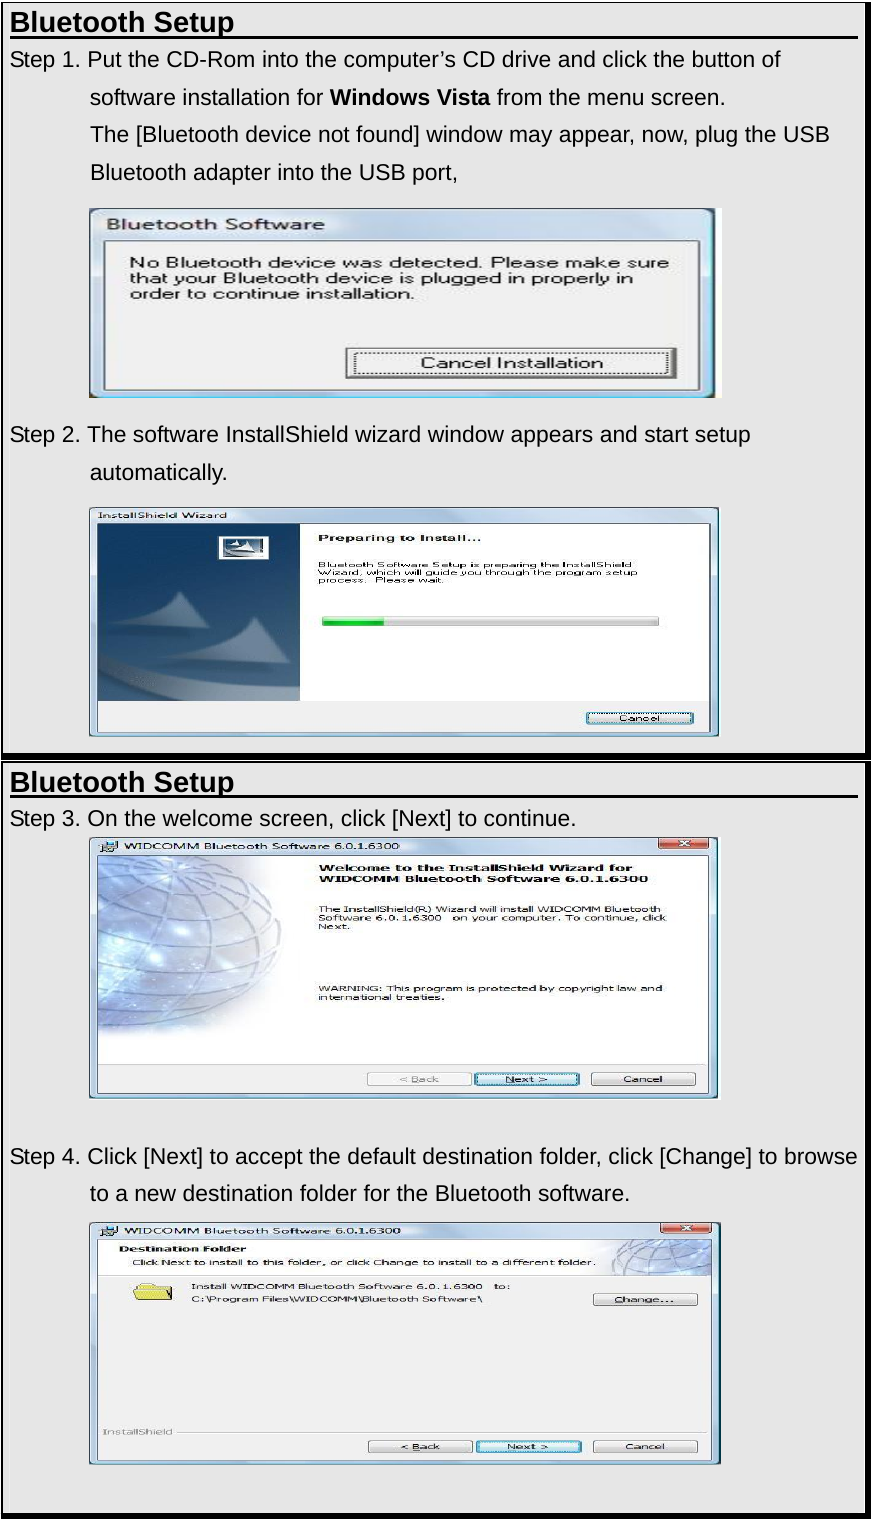 Bluetooth Setup                                           Step 1. Put the CD-Rom into the computer’s CD drive and click the button of   software installation for Windows Vista from the menu screen.   The [Bluetooth device not found] window may appear, now, plug the USB Bluetooth adapter into the USB port,    Step 2. The software InstallShield wizard window appears and start setup   automatically.  Bluetooth Setup                                           Step 3. On the welcome screen, click [Next] to continue.                 Step 4. Click [Next] to accept the default destination folder, click [Change] to browse              to a new destination folder for the Bluetooth software.           